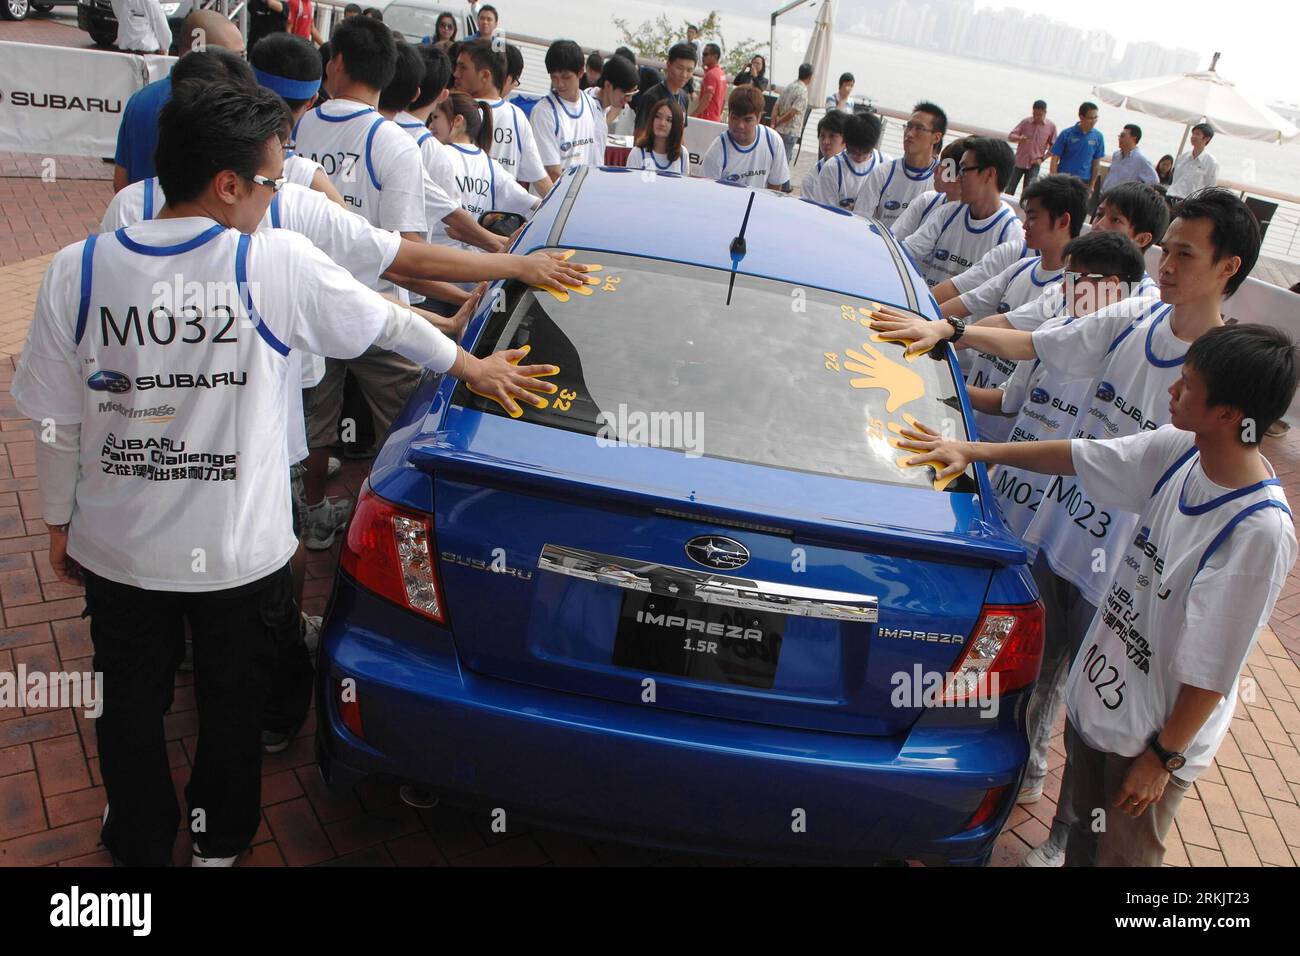 Bildnummer: 56161334  Datum: 09.10.2011  Copyright: imago/Xinhua (111009) -- MACAO, Oct. 9, 2011 (Xinhua) -- Competitors participate in the Subaru Palm Challenge 2011 in Macao, south China, Oct. 9, 2011. Contestants are asked to follow some instructions while sticking their right hands to a car for six hours. (Xinhua/Cheong Kam Ka)(cyl) CHINA-MACAO-SUBARU PALM CHALLENGE 2011 (CN) PUBLICATIONxNOTxINxCHN Gesellschaft Wettkampf kurios Auto berühren x0x xtm 2011 quer      56161334 Date 09 10 2011 Copyright Imago XINHUA  Macao OCT 9 2011 XINHUA Competitors participate in The Subaru Palm Challenge 2 Stock Photo